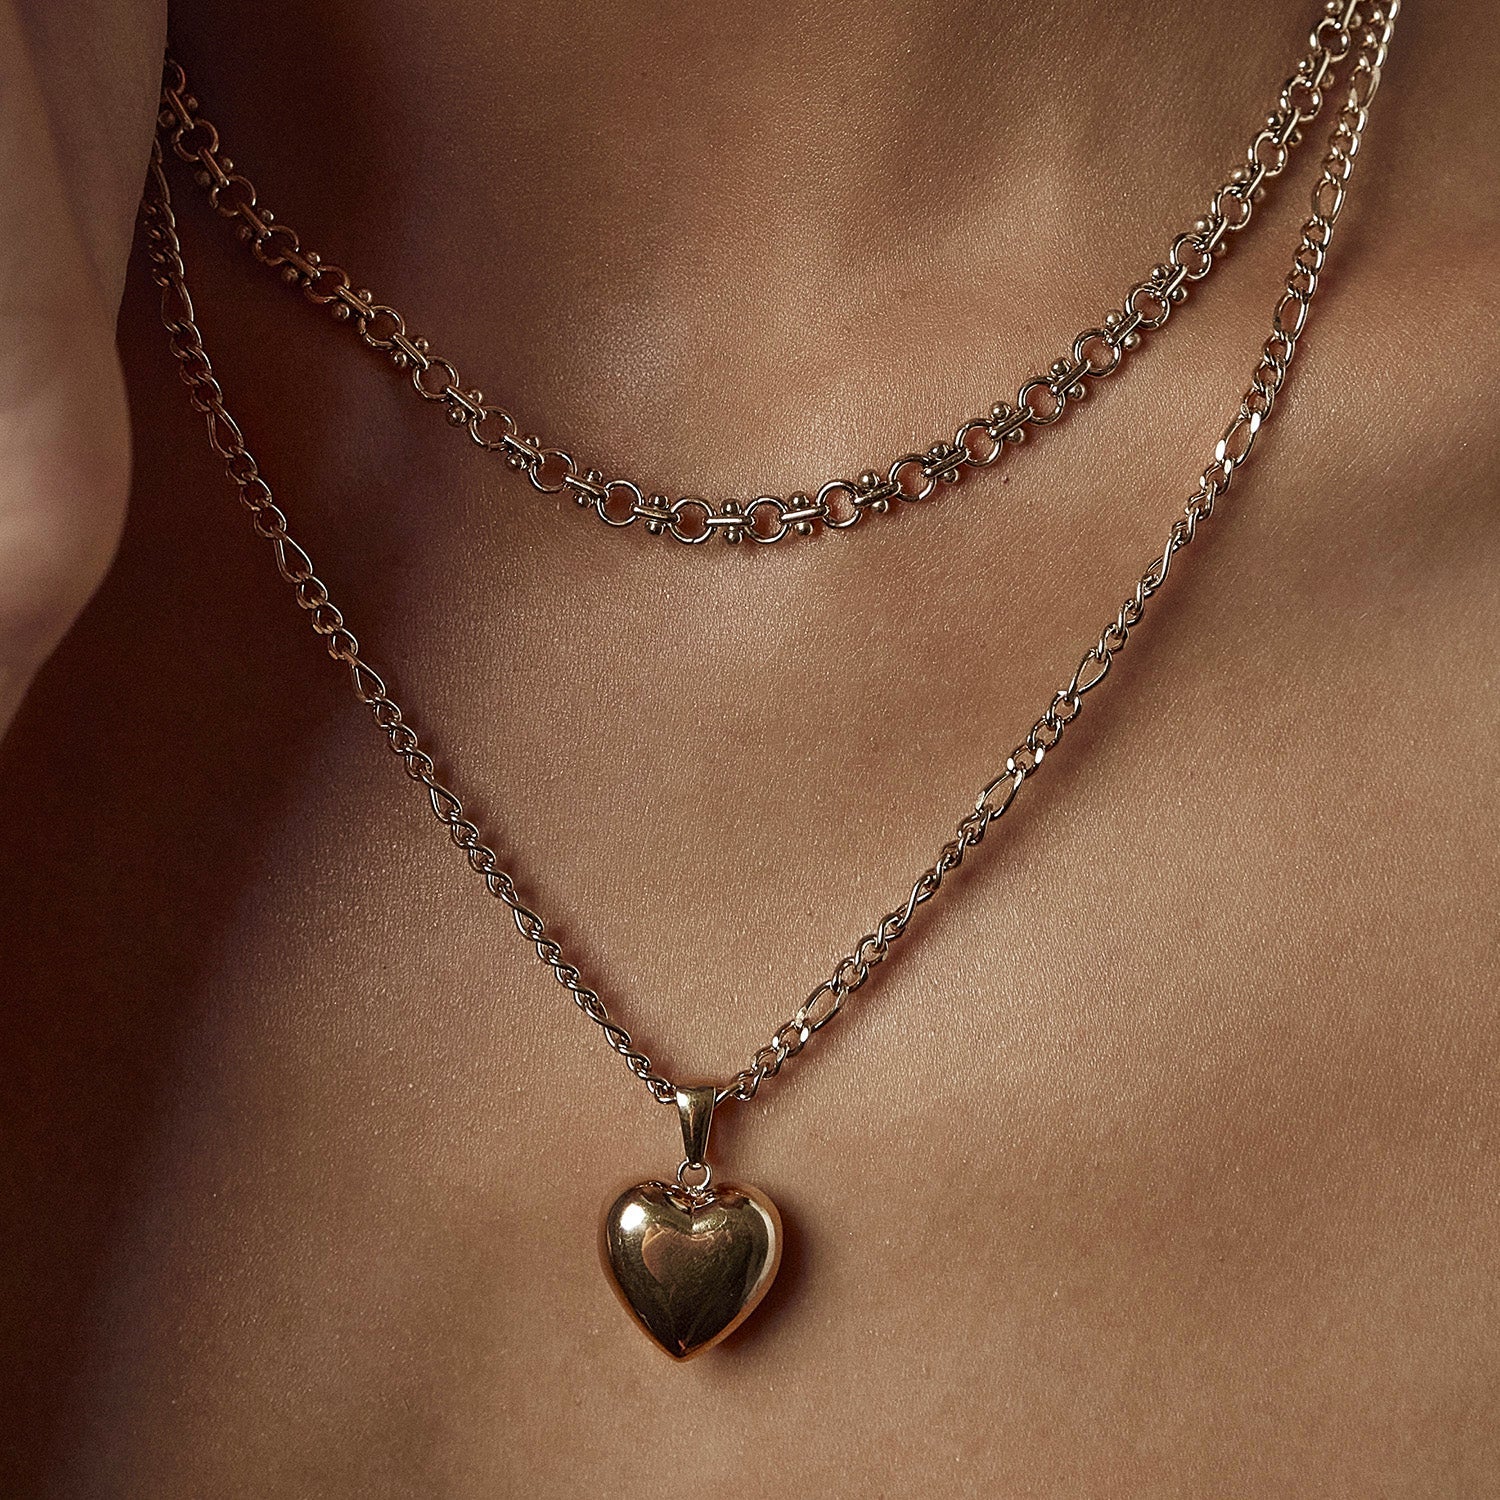 ARMS OF EVE ROSE HEART NECKLACE: GOLD